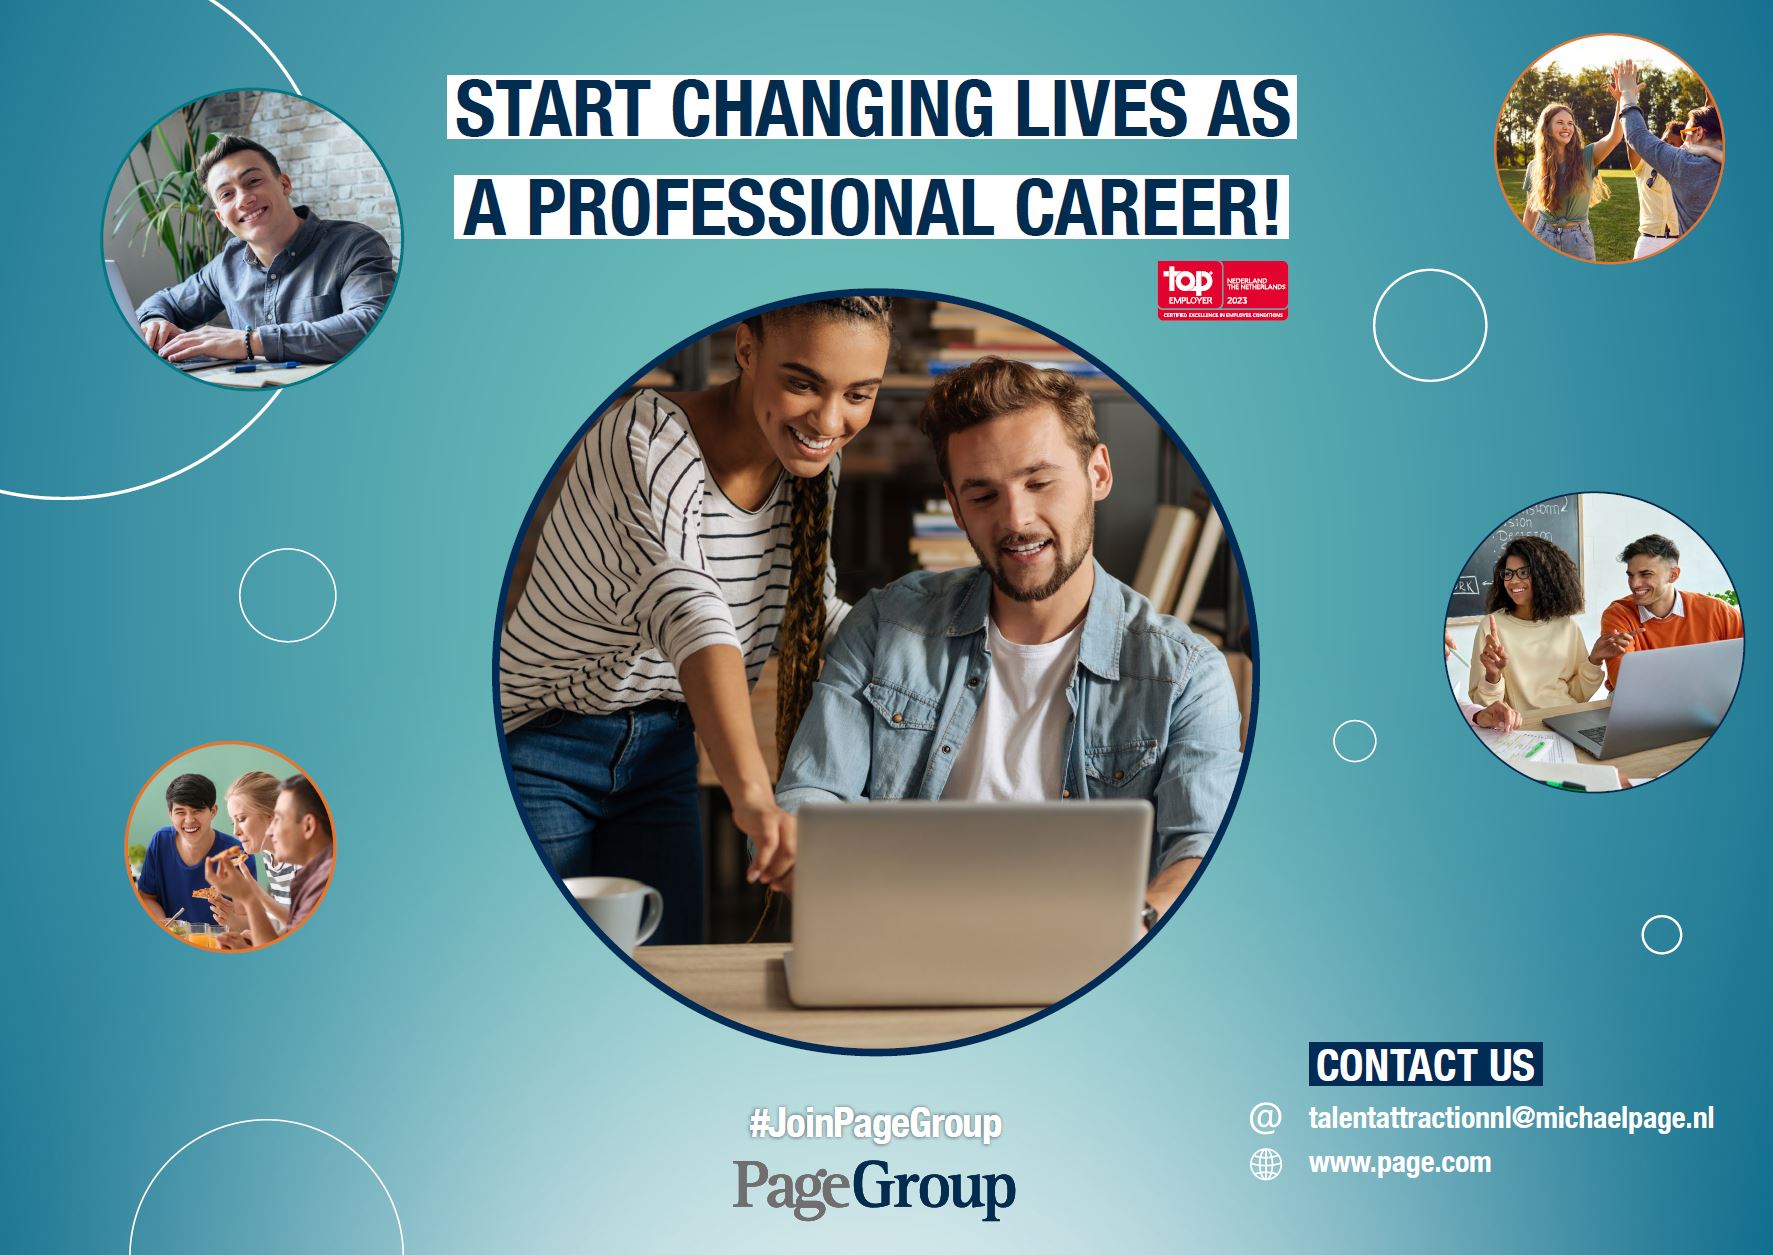 Consultant at Michael Page